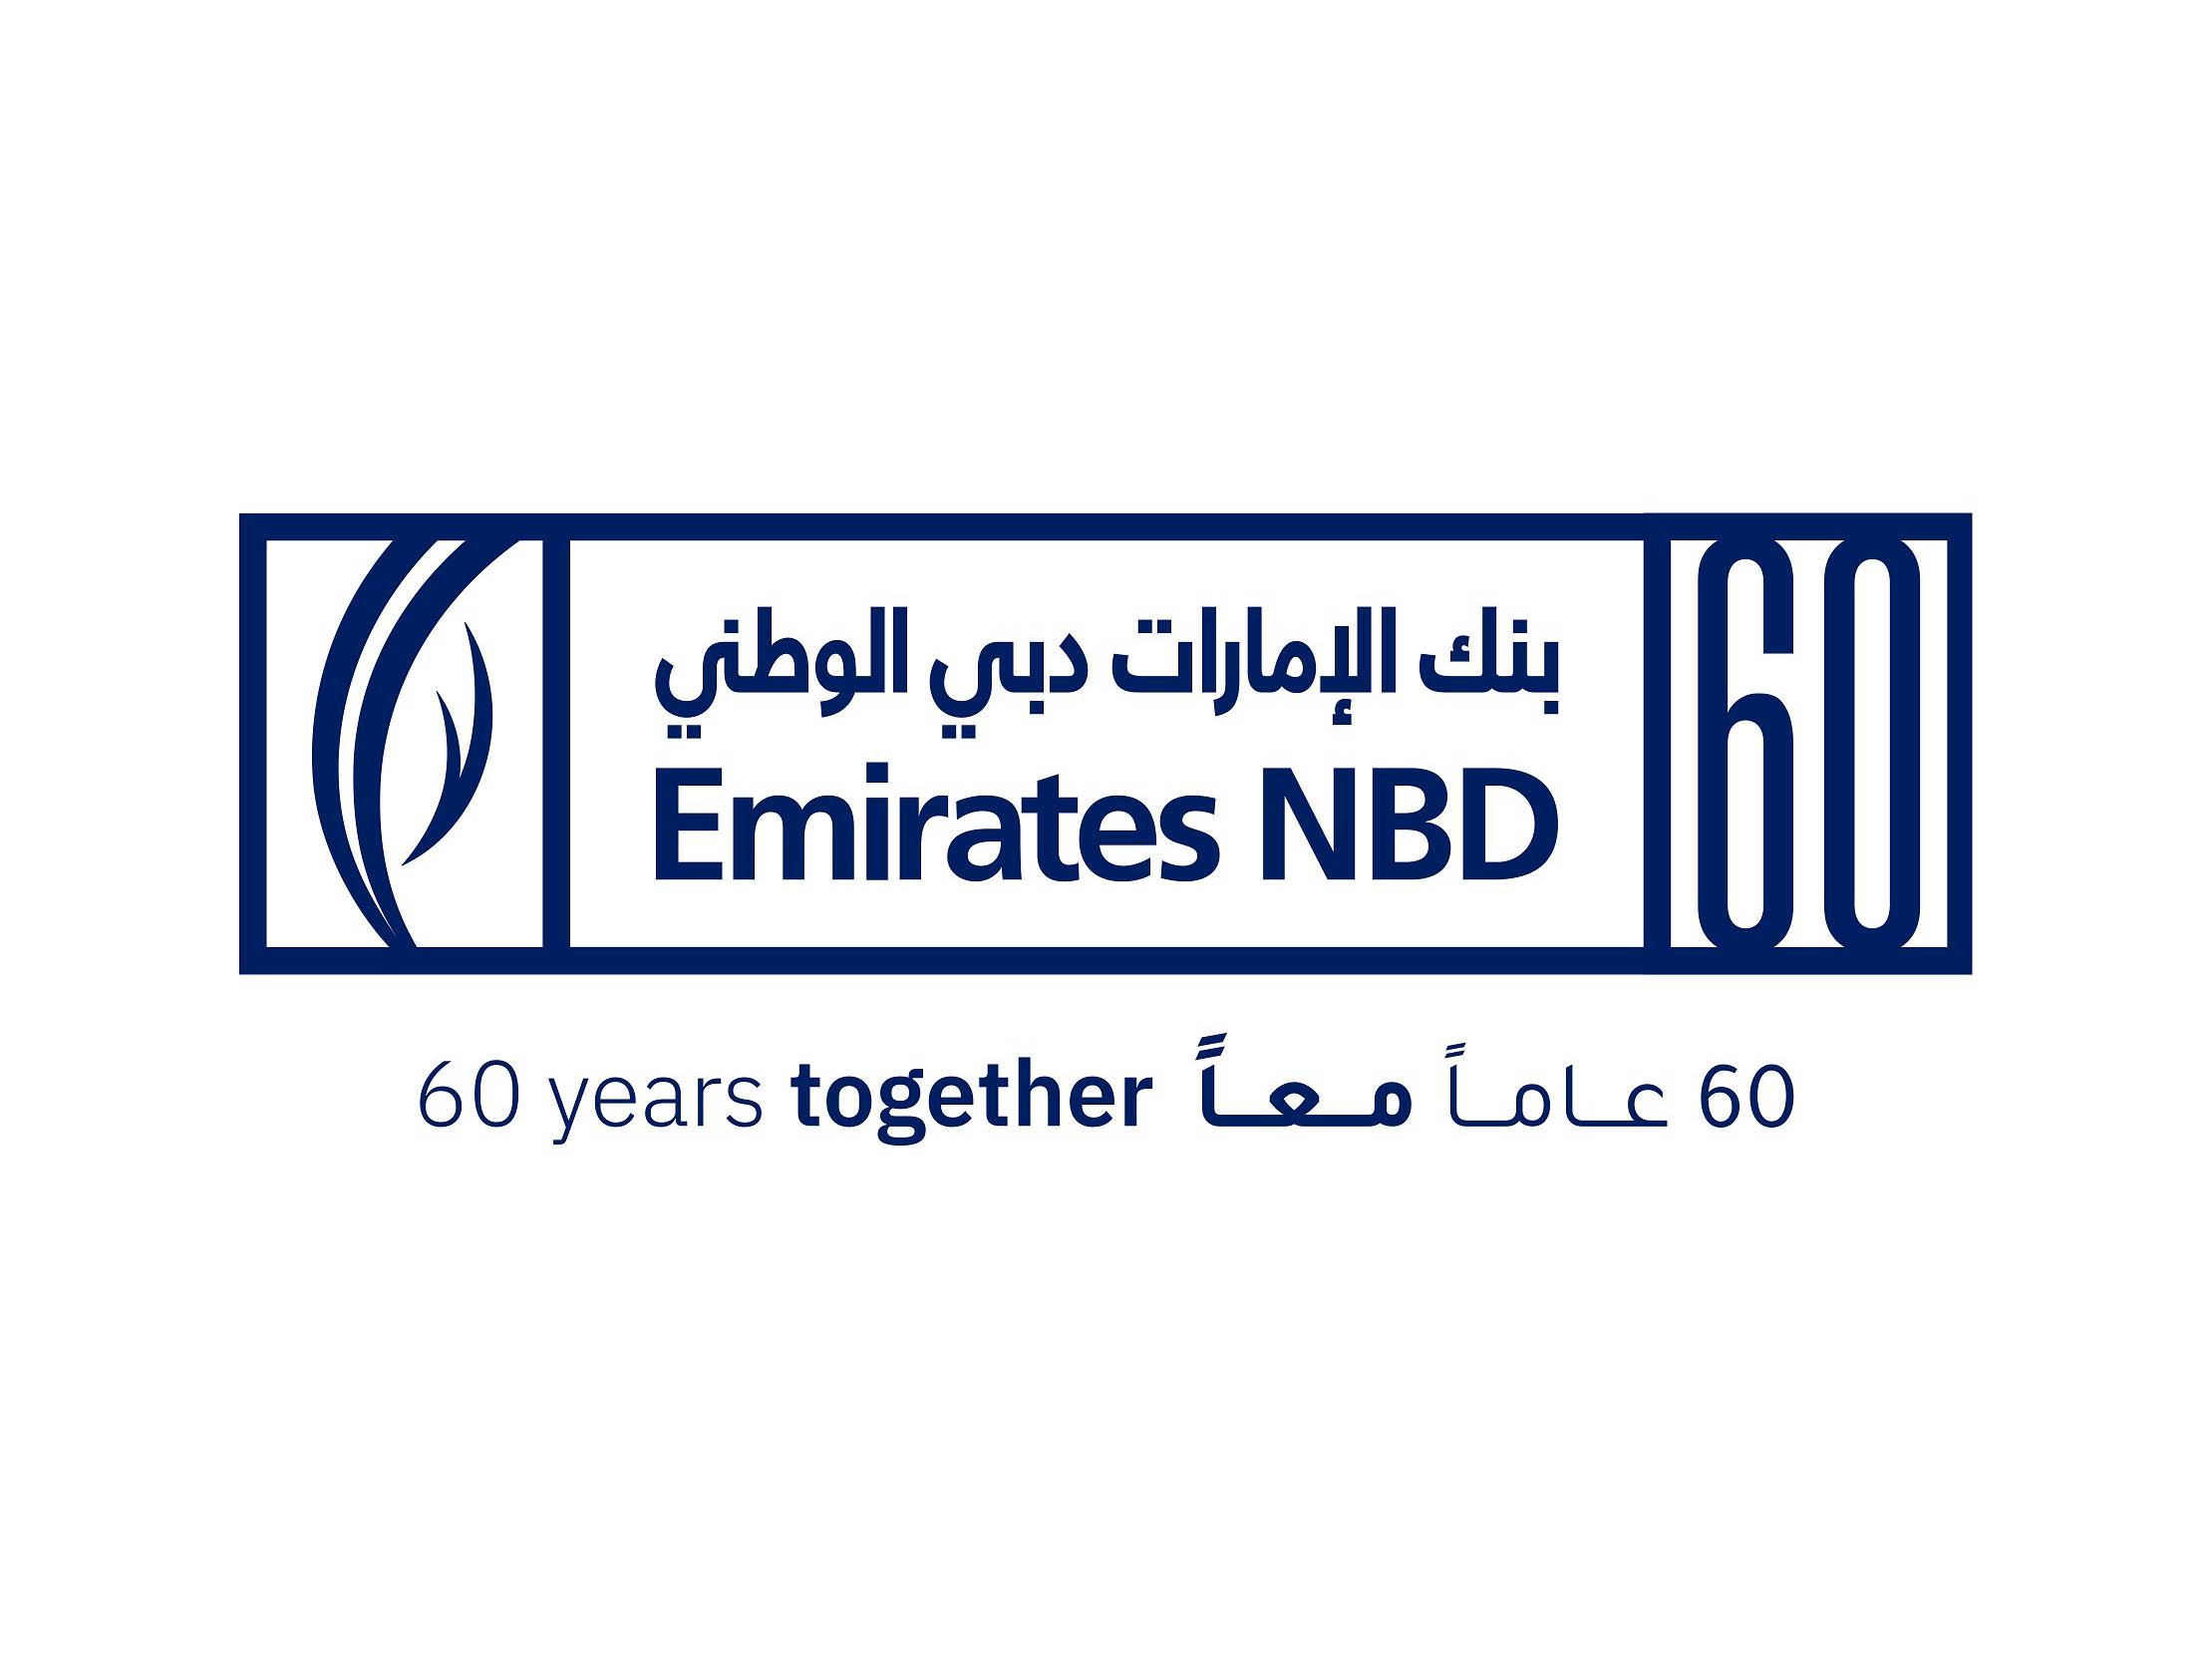 Emirates NBD unveils special 60th anniversary logo and ‘60 years together’ theme